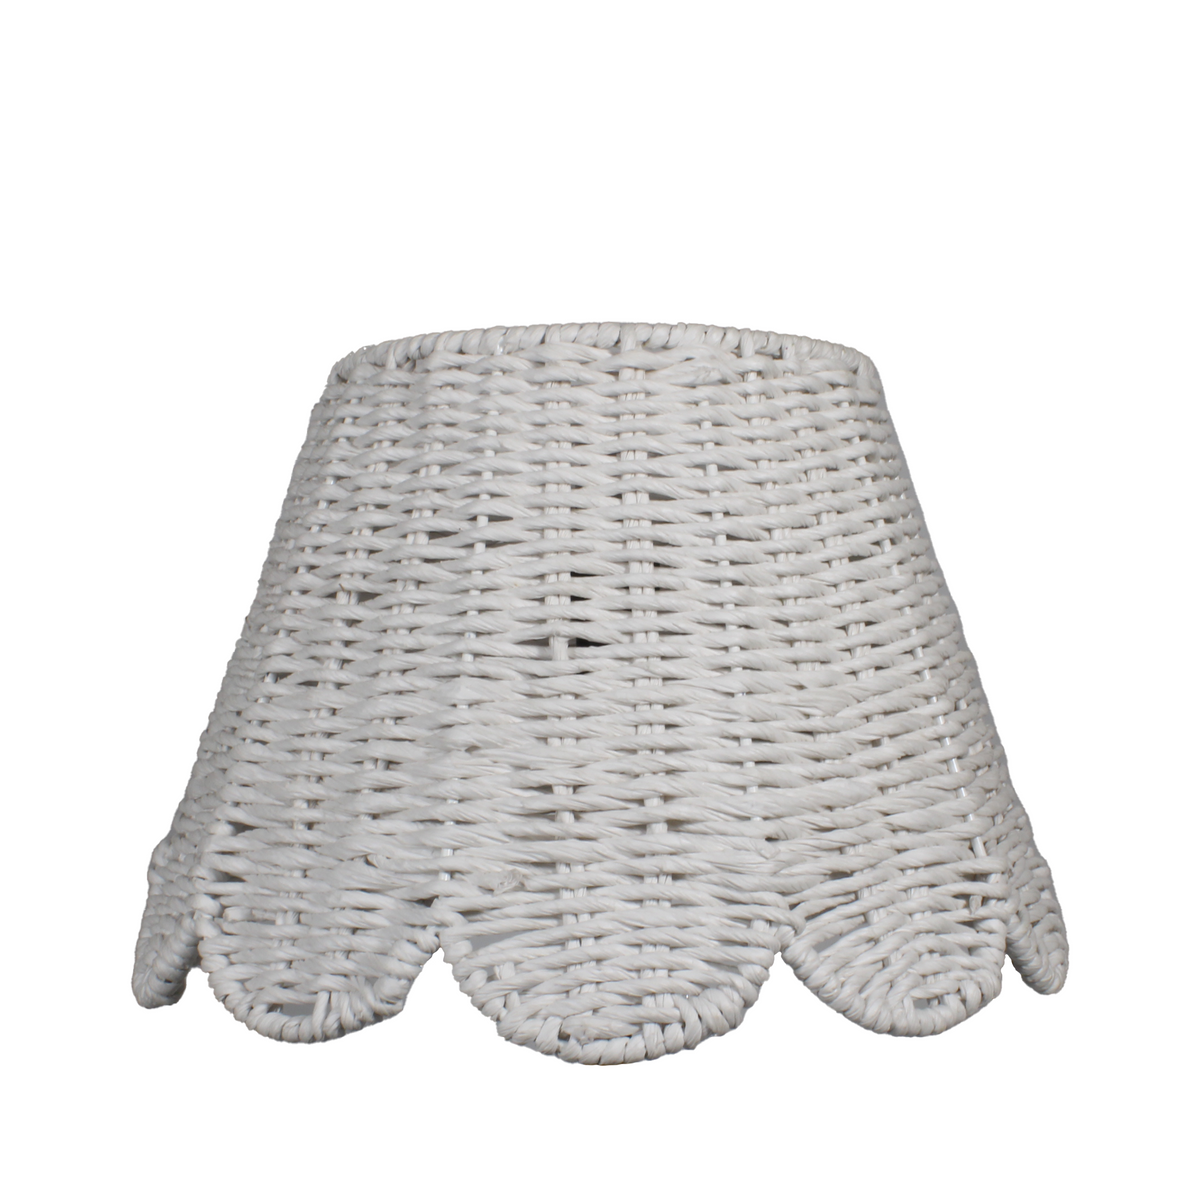 Scalloped Lampshade in White Twisted Rope